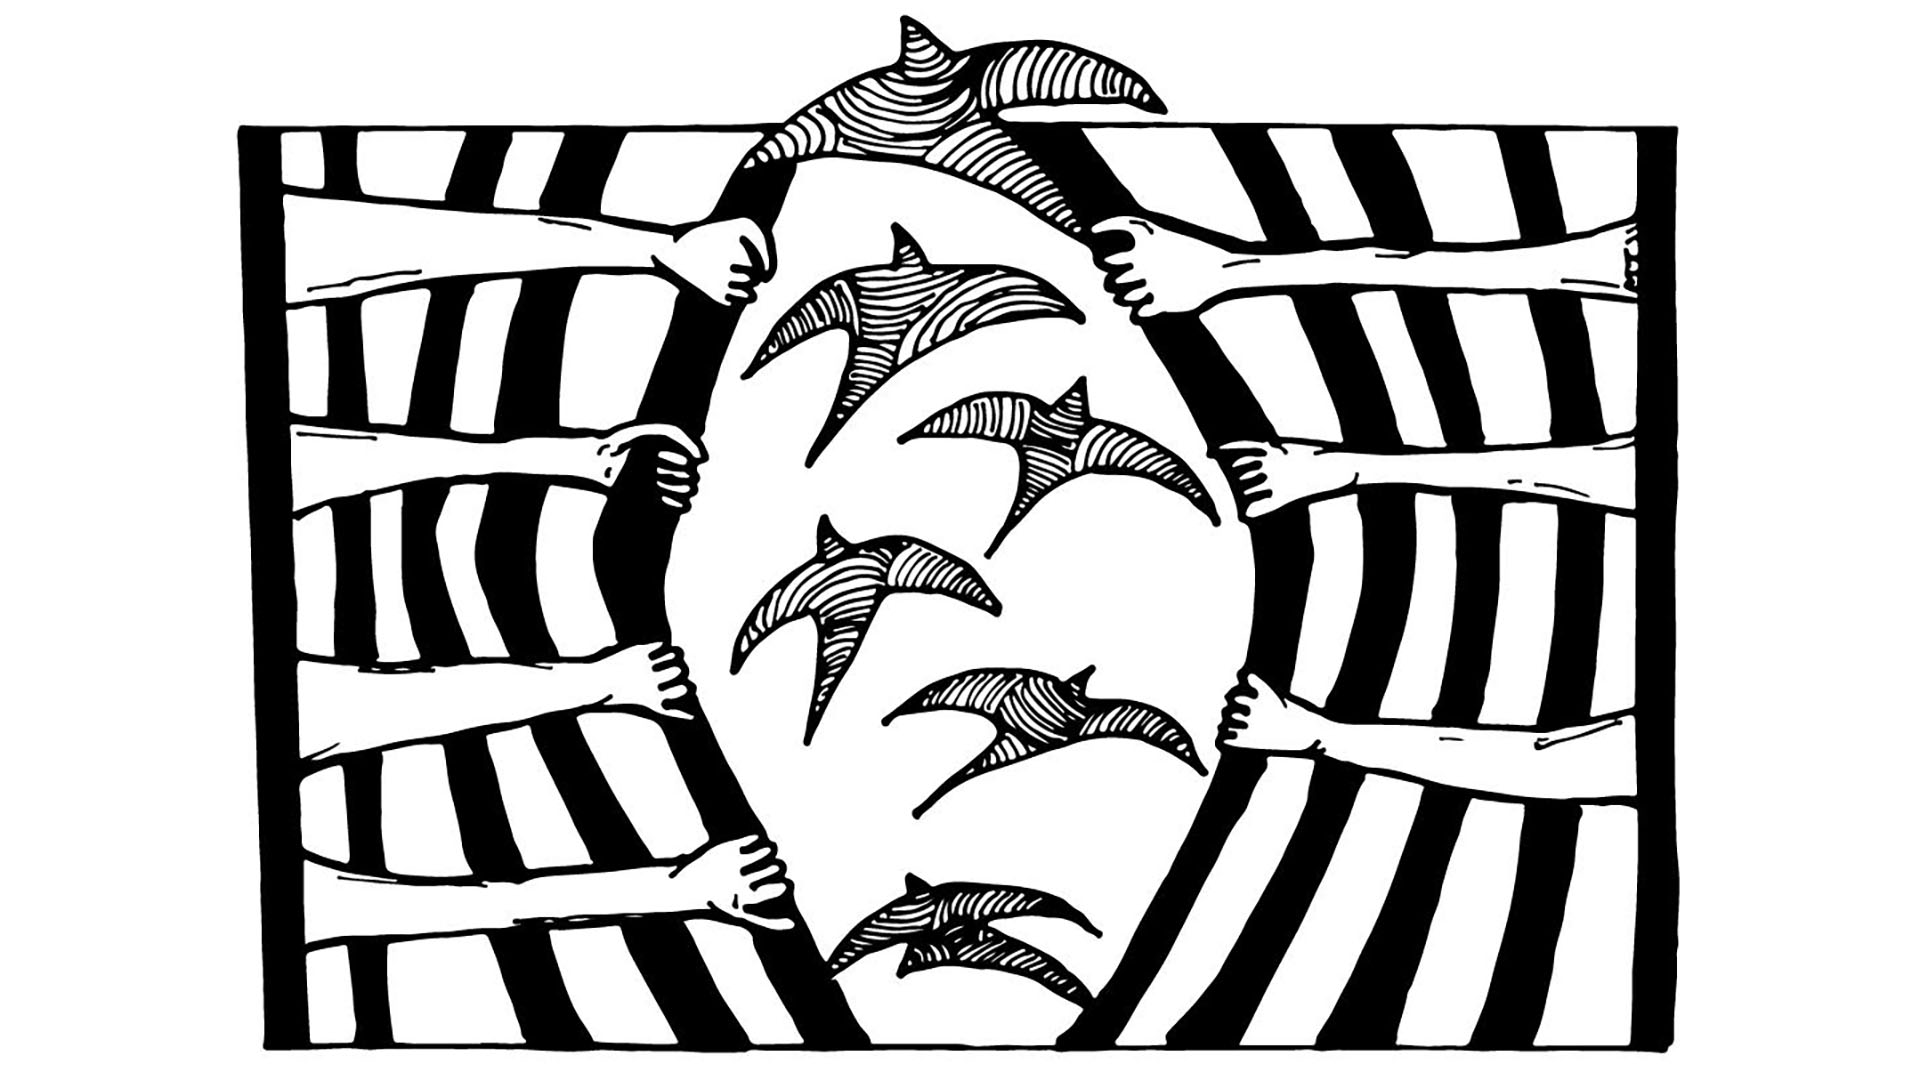 Black and white illustration of hands opening bars to release birds